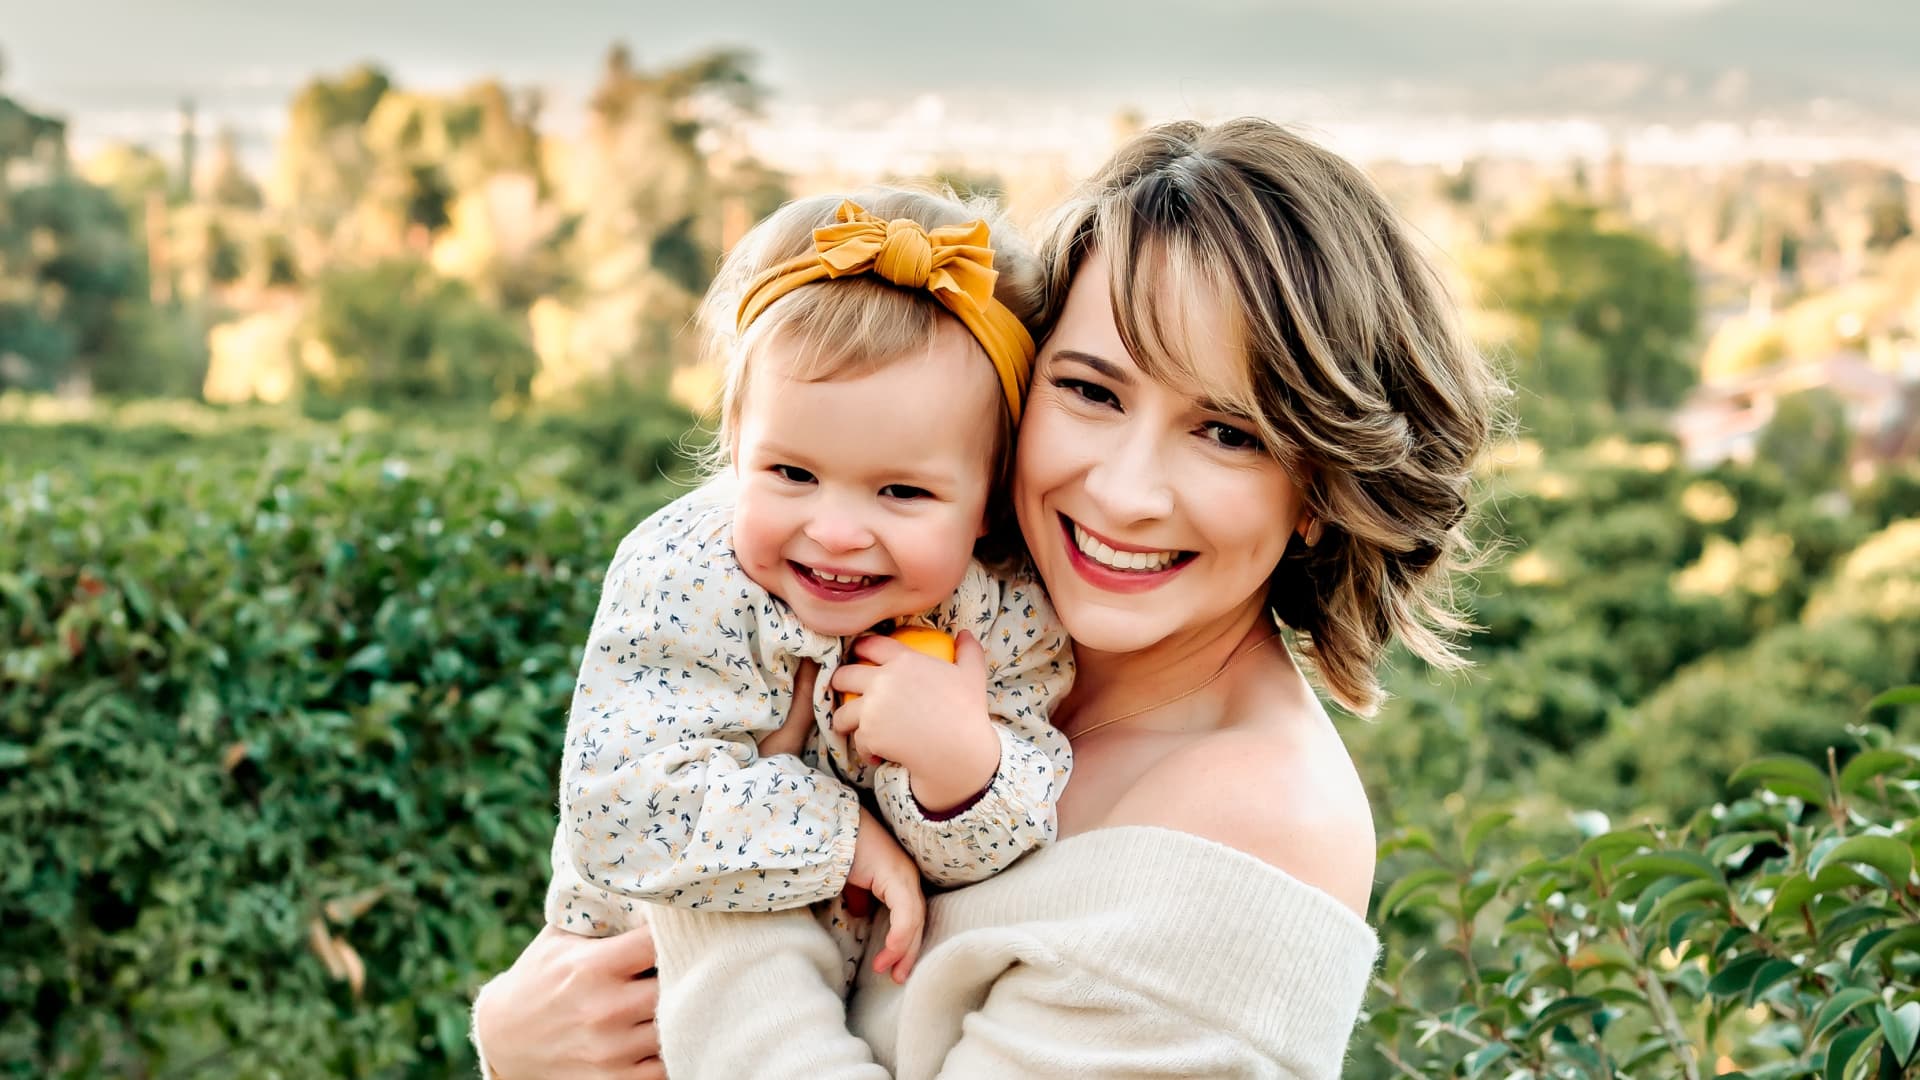 The No. 1 piece of side hustle advice, from 2 moms who make thousands in passive income